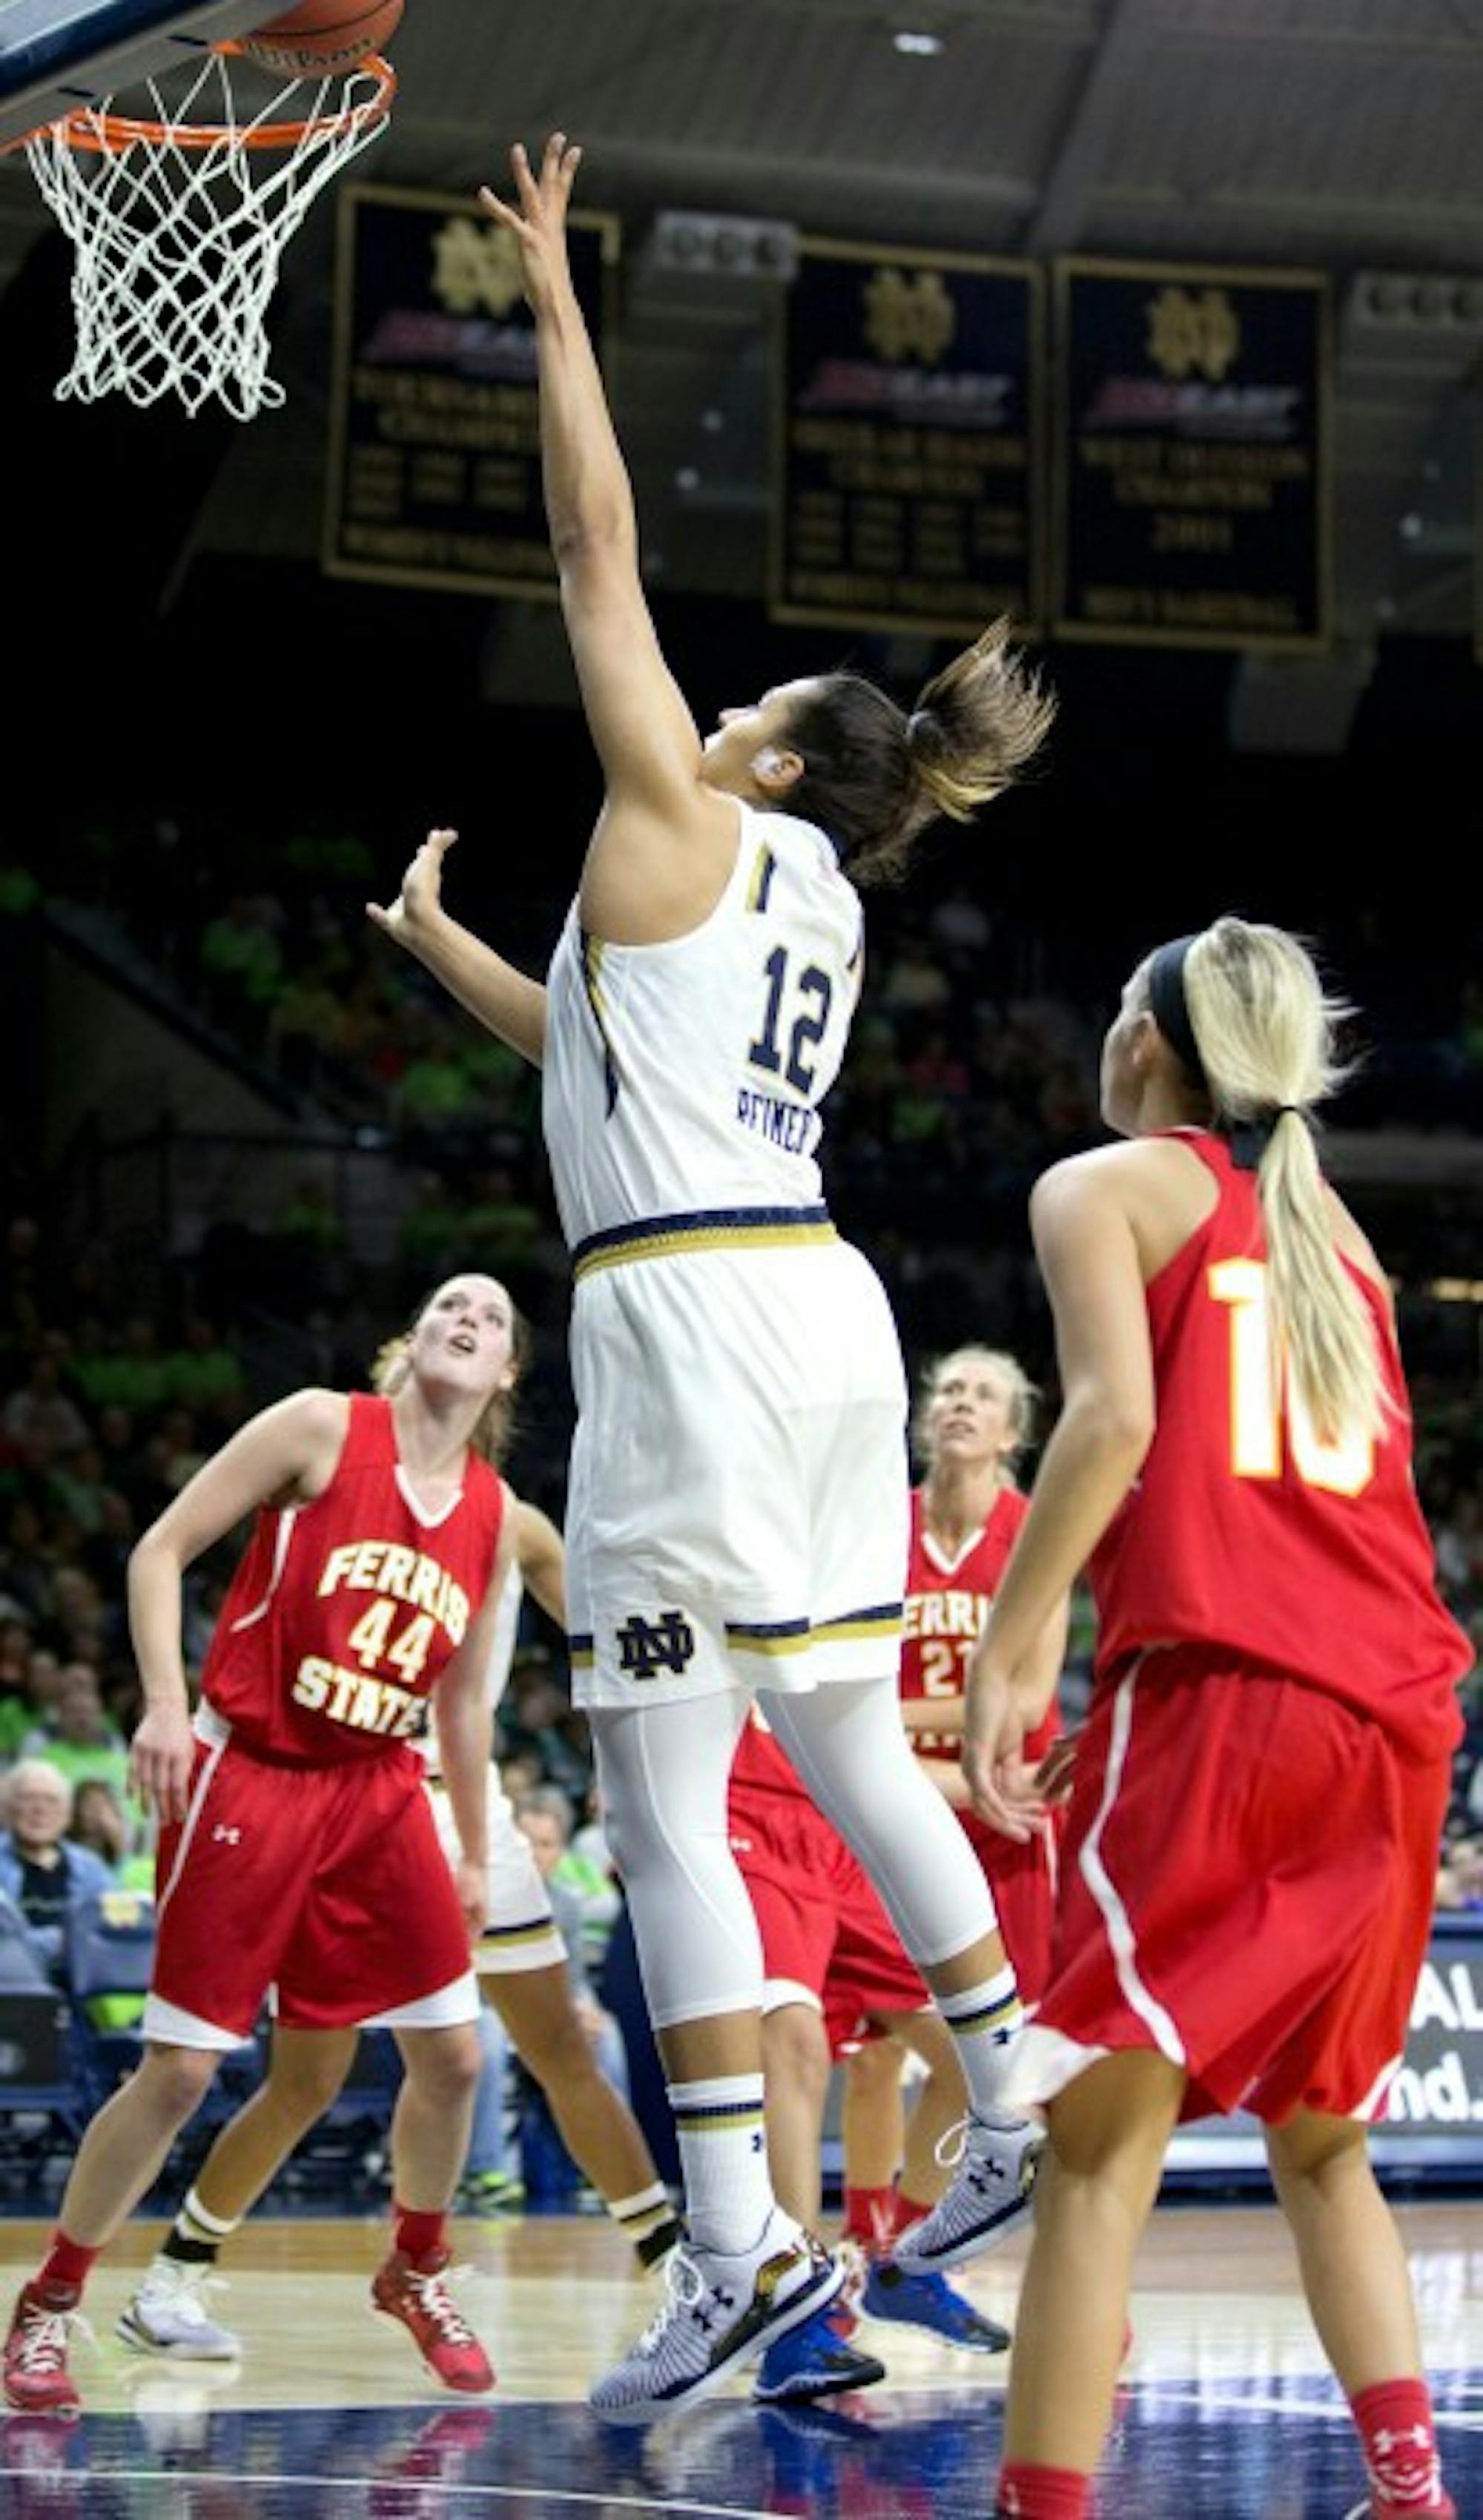 Irish sophomore forward Taya Reimer goes up for a rebound during Notre Dame’s win over Ferris State on Wednesday night.